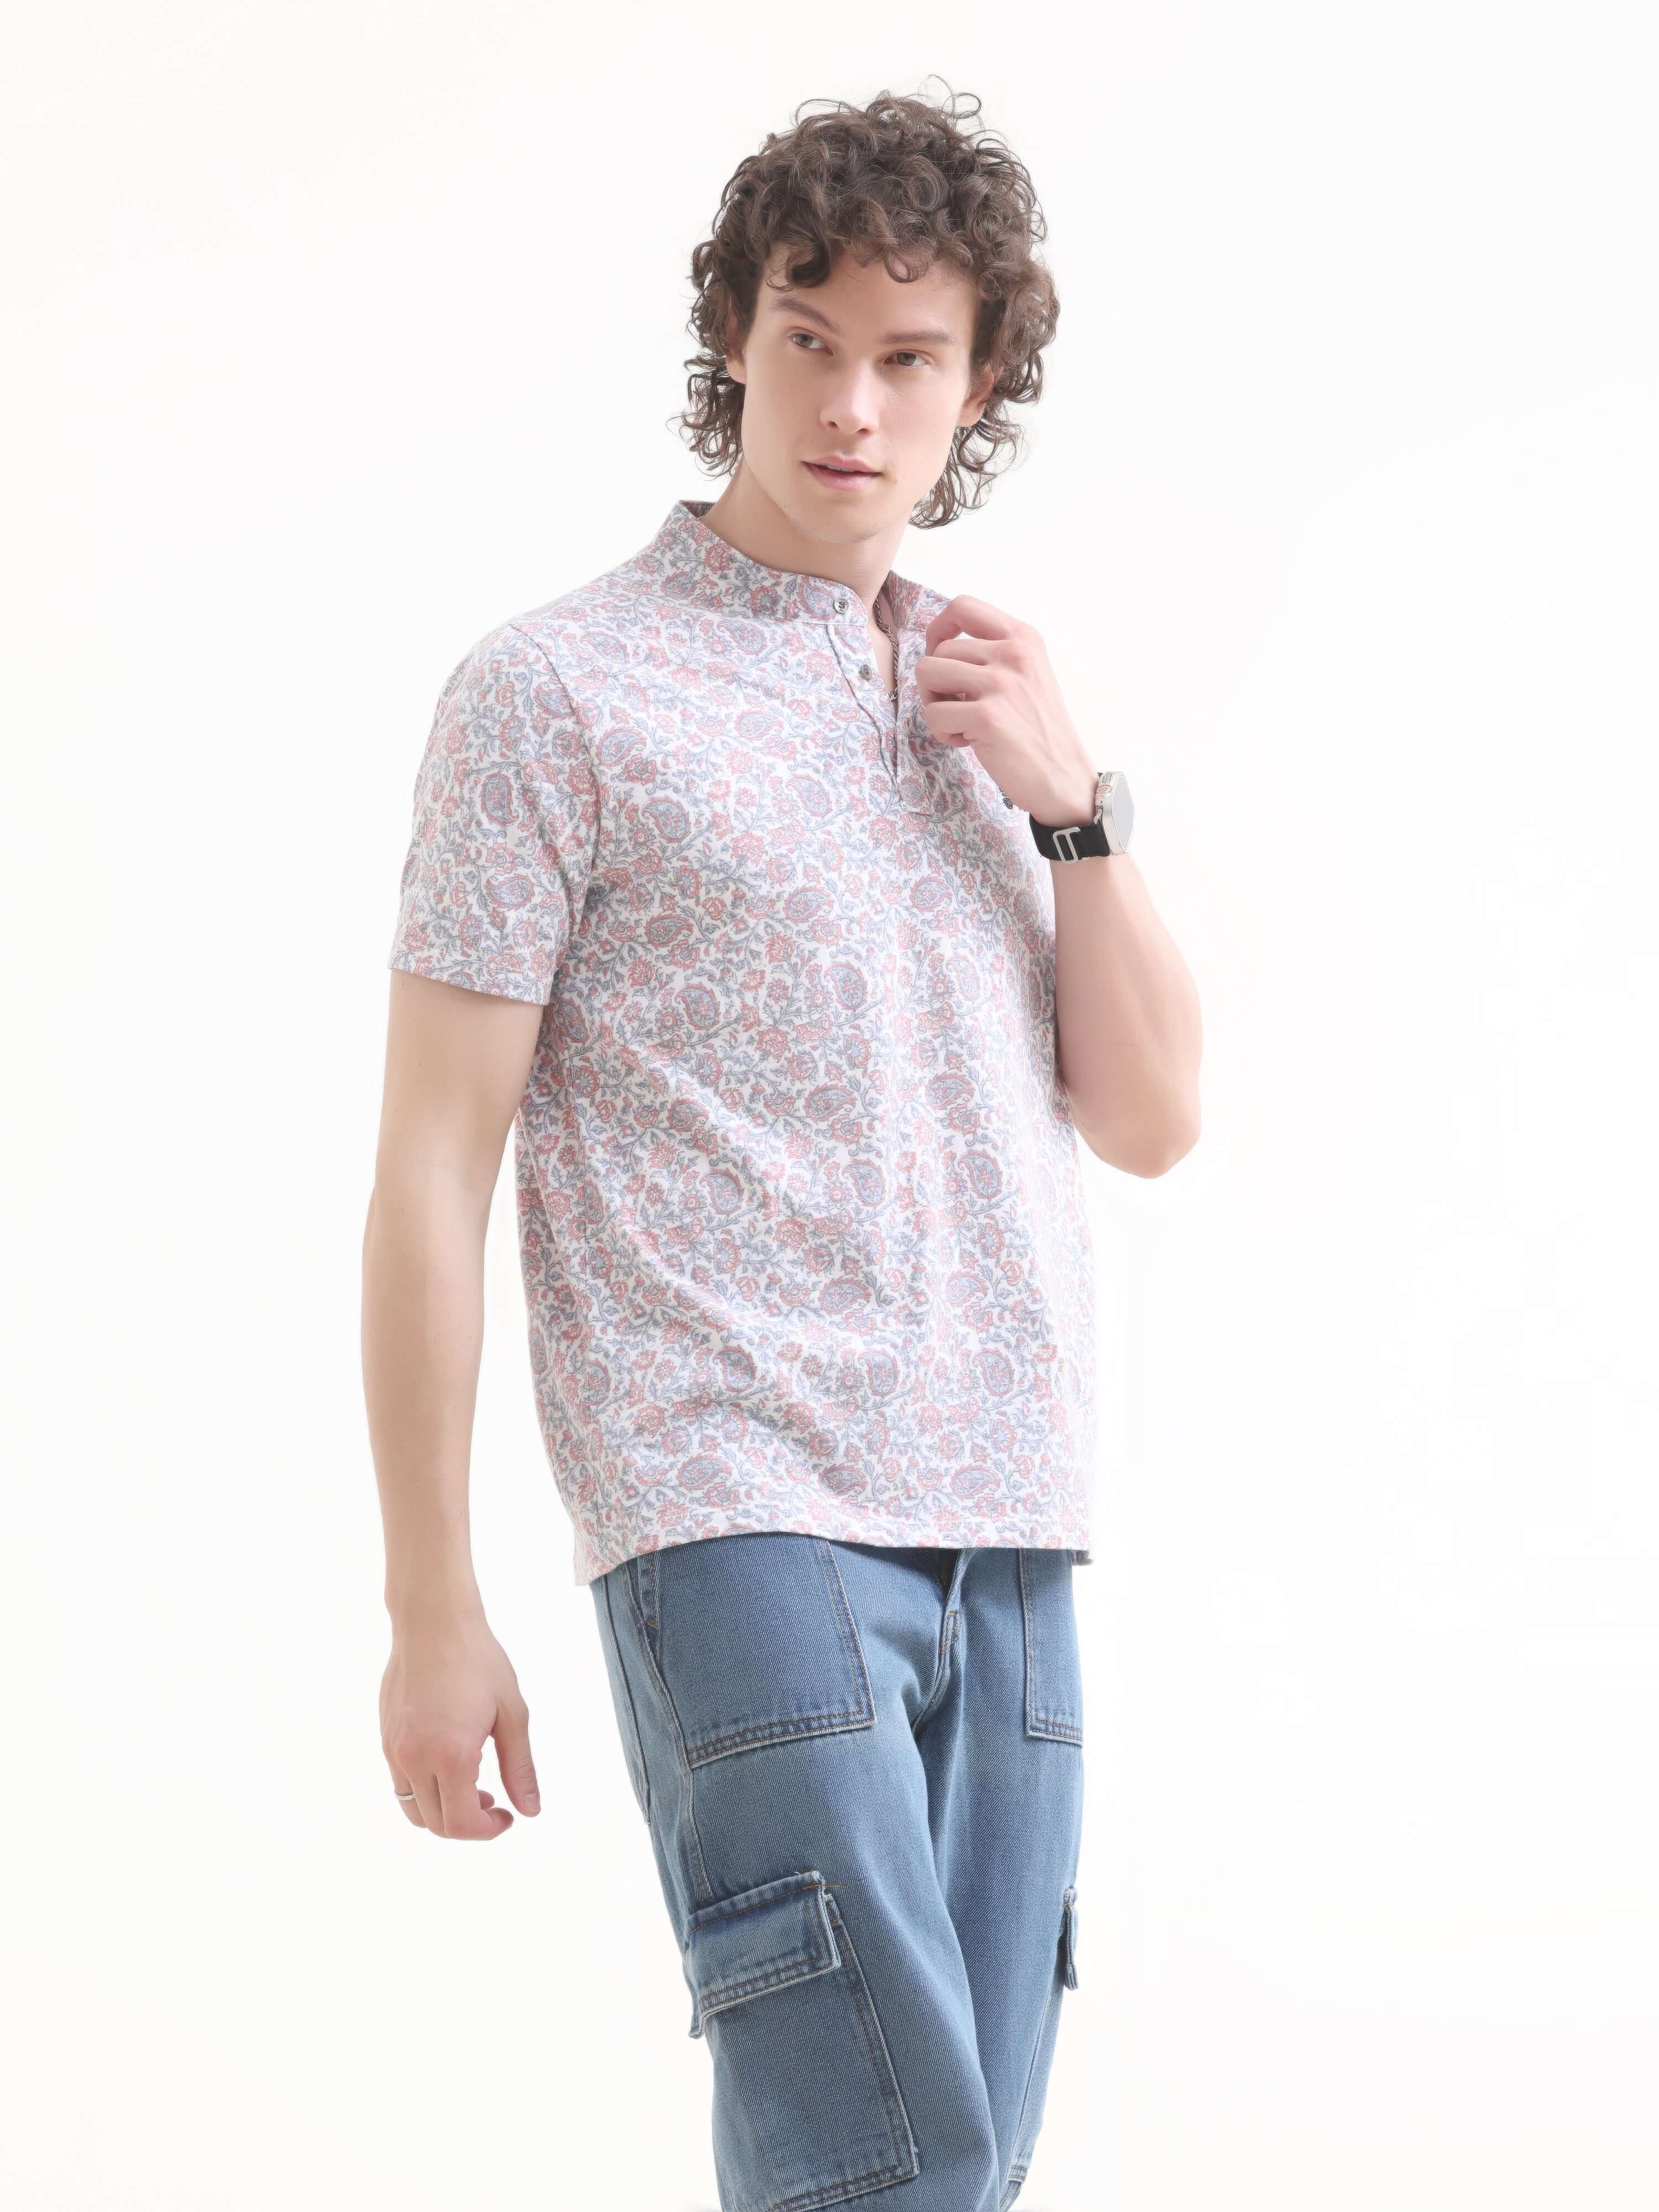 Men's Floral Pink Henley T-Shirt - New Summer Arrival shop online at Estilocus. Discover the perfect blend of style & comfort with our Lim floral pink Henley t-shirt. Lightweight, 100% cotton, and a regular fit for all occasions. Shop now!